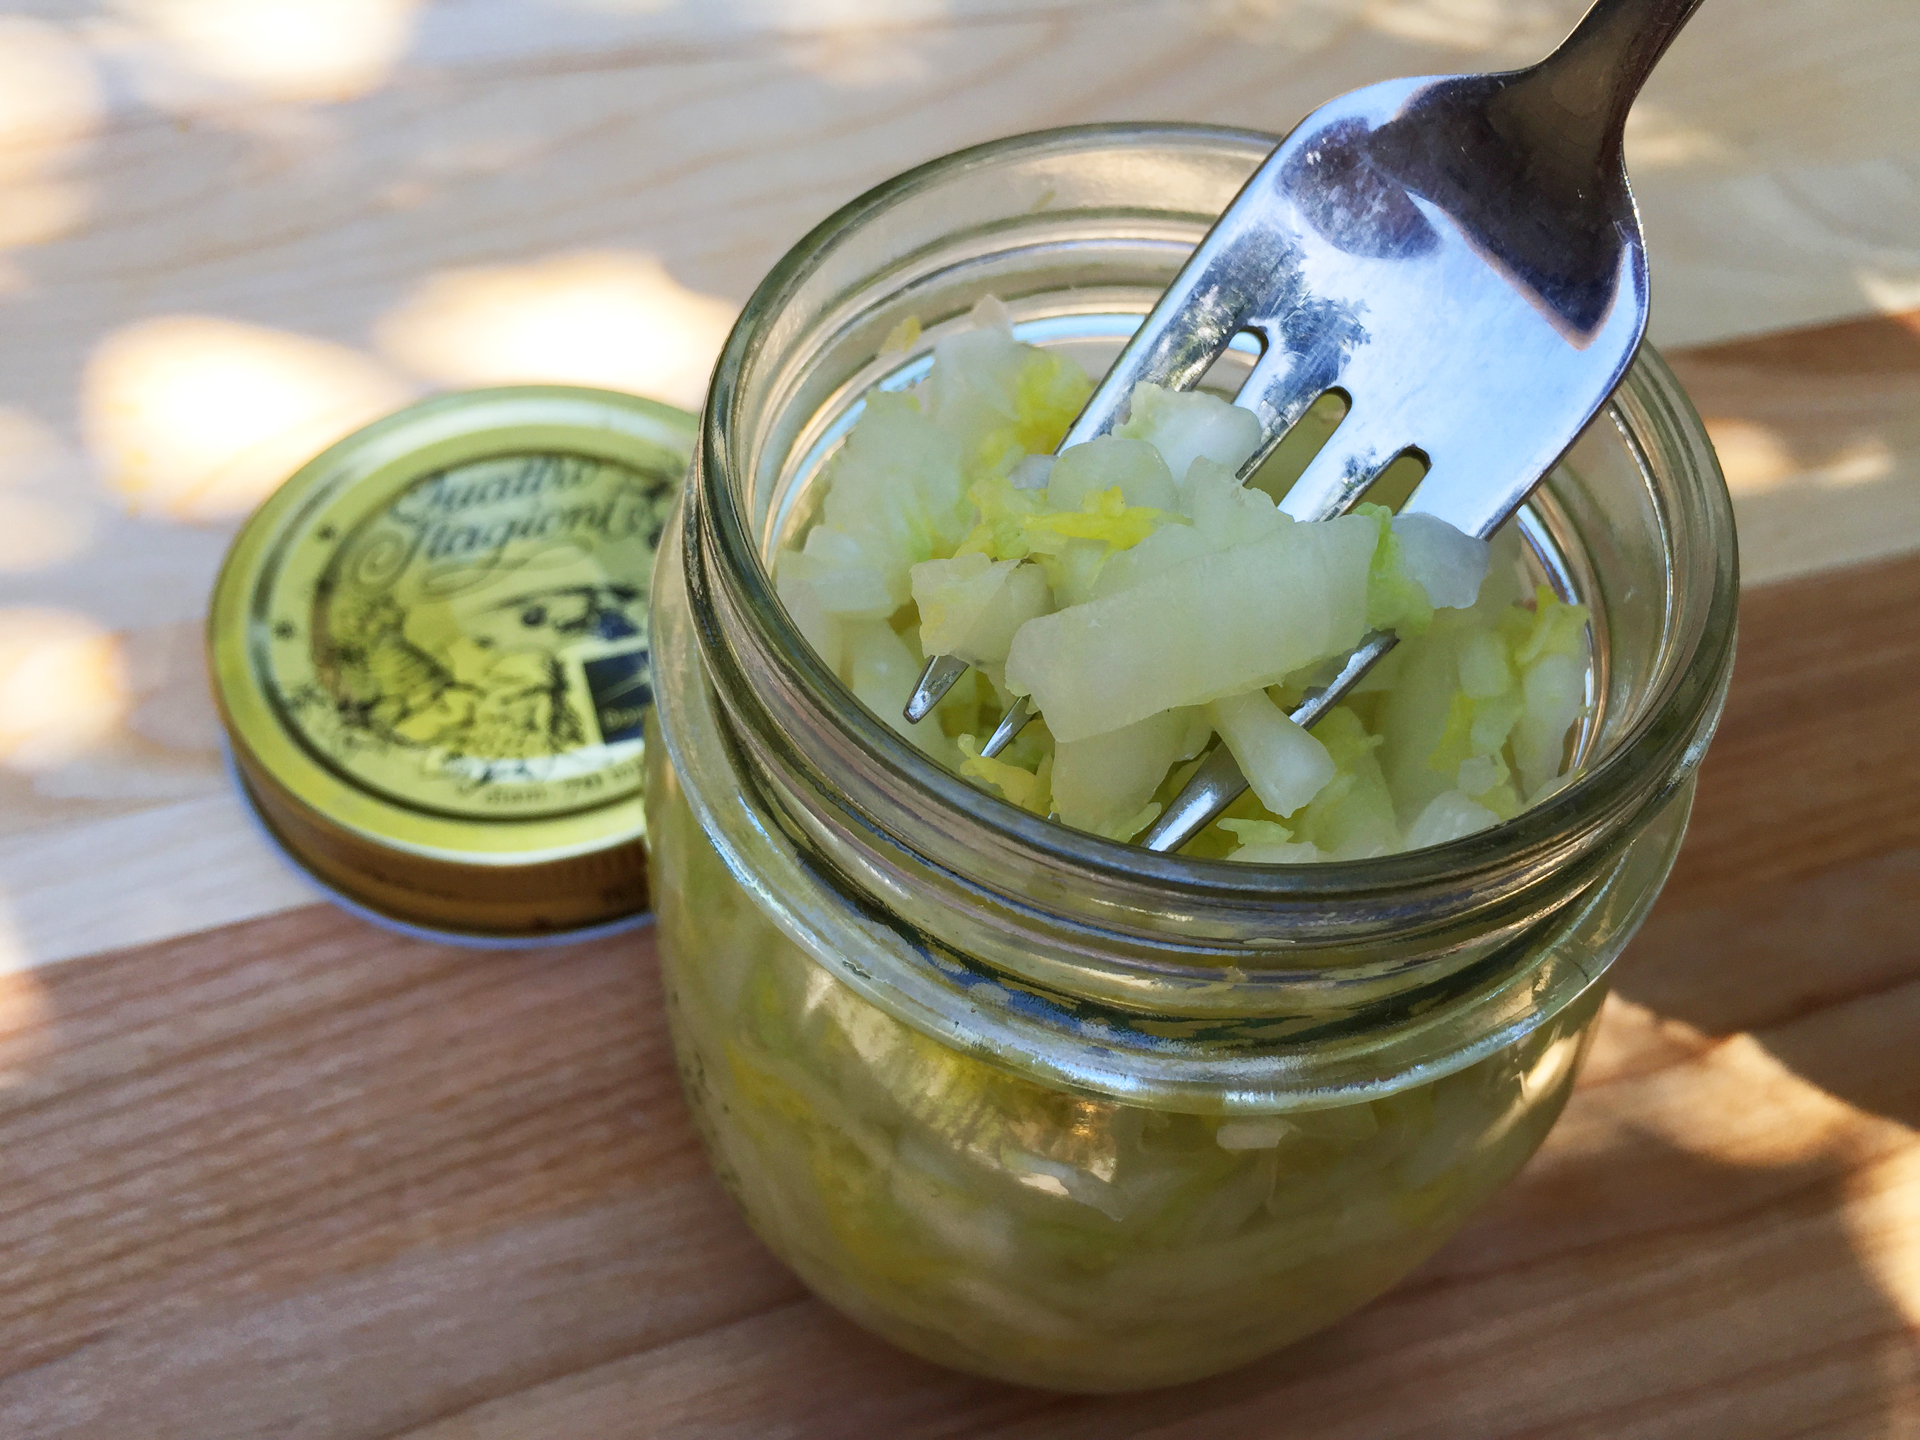 The ferment-your-own sauerkraut trend is on the rise, spurred by the promise of good health.